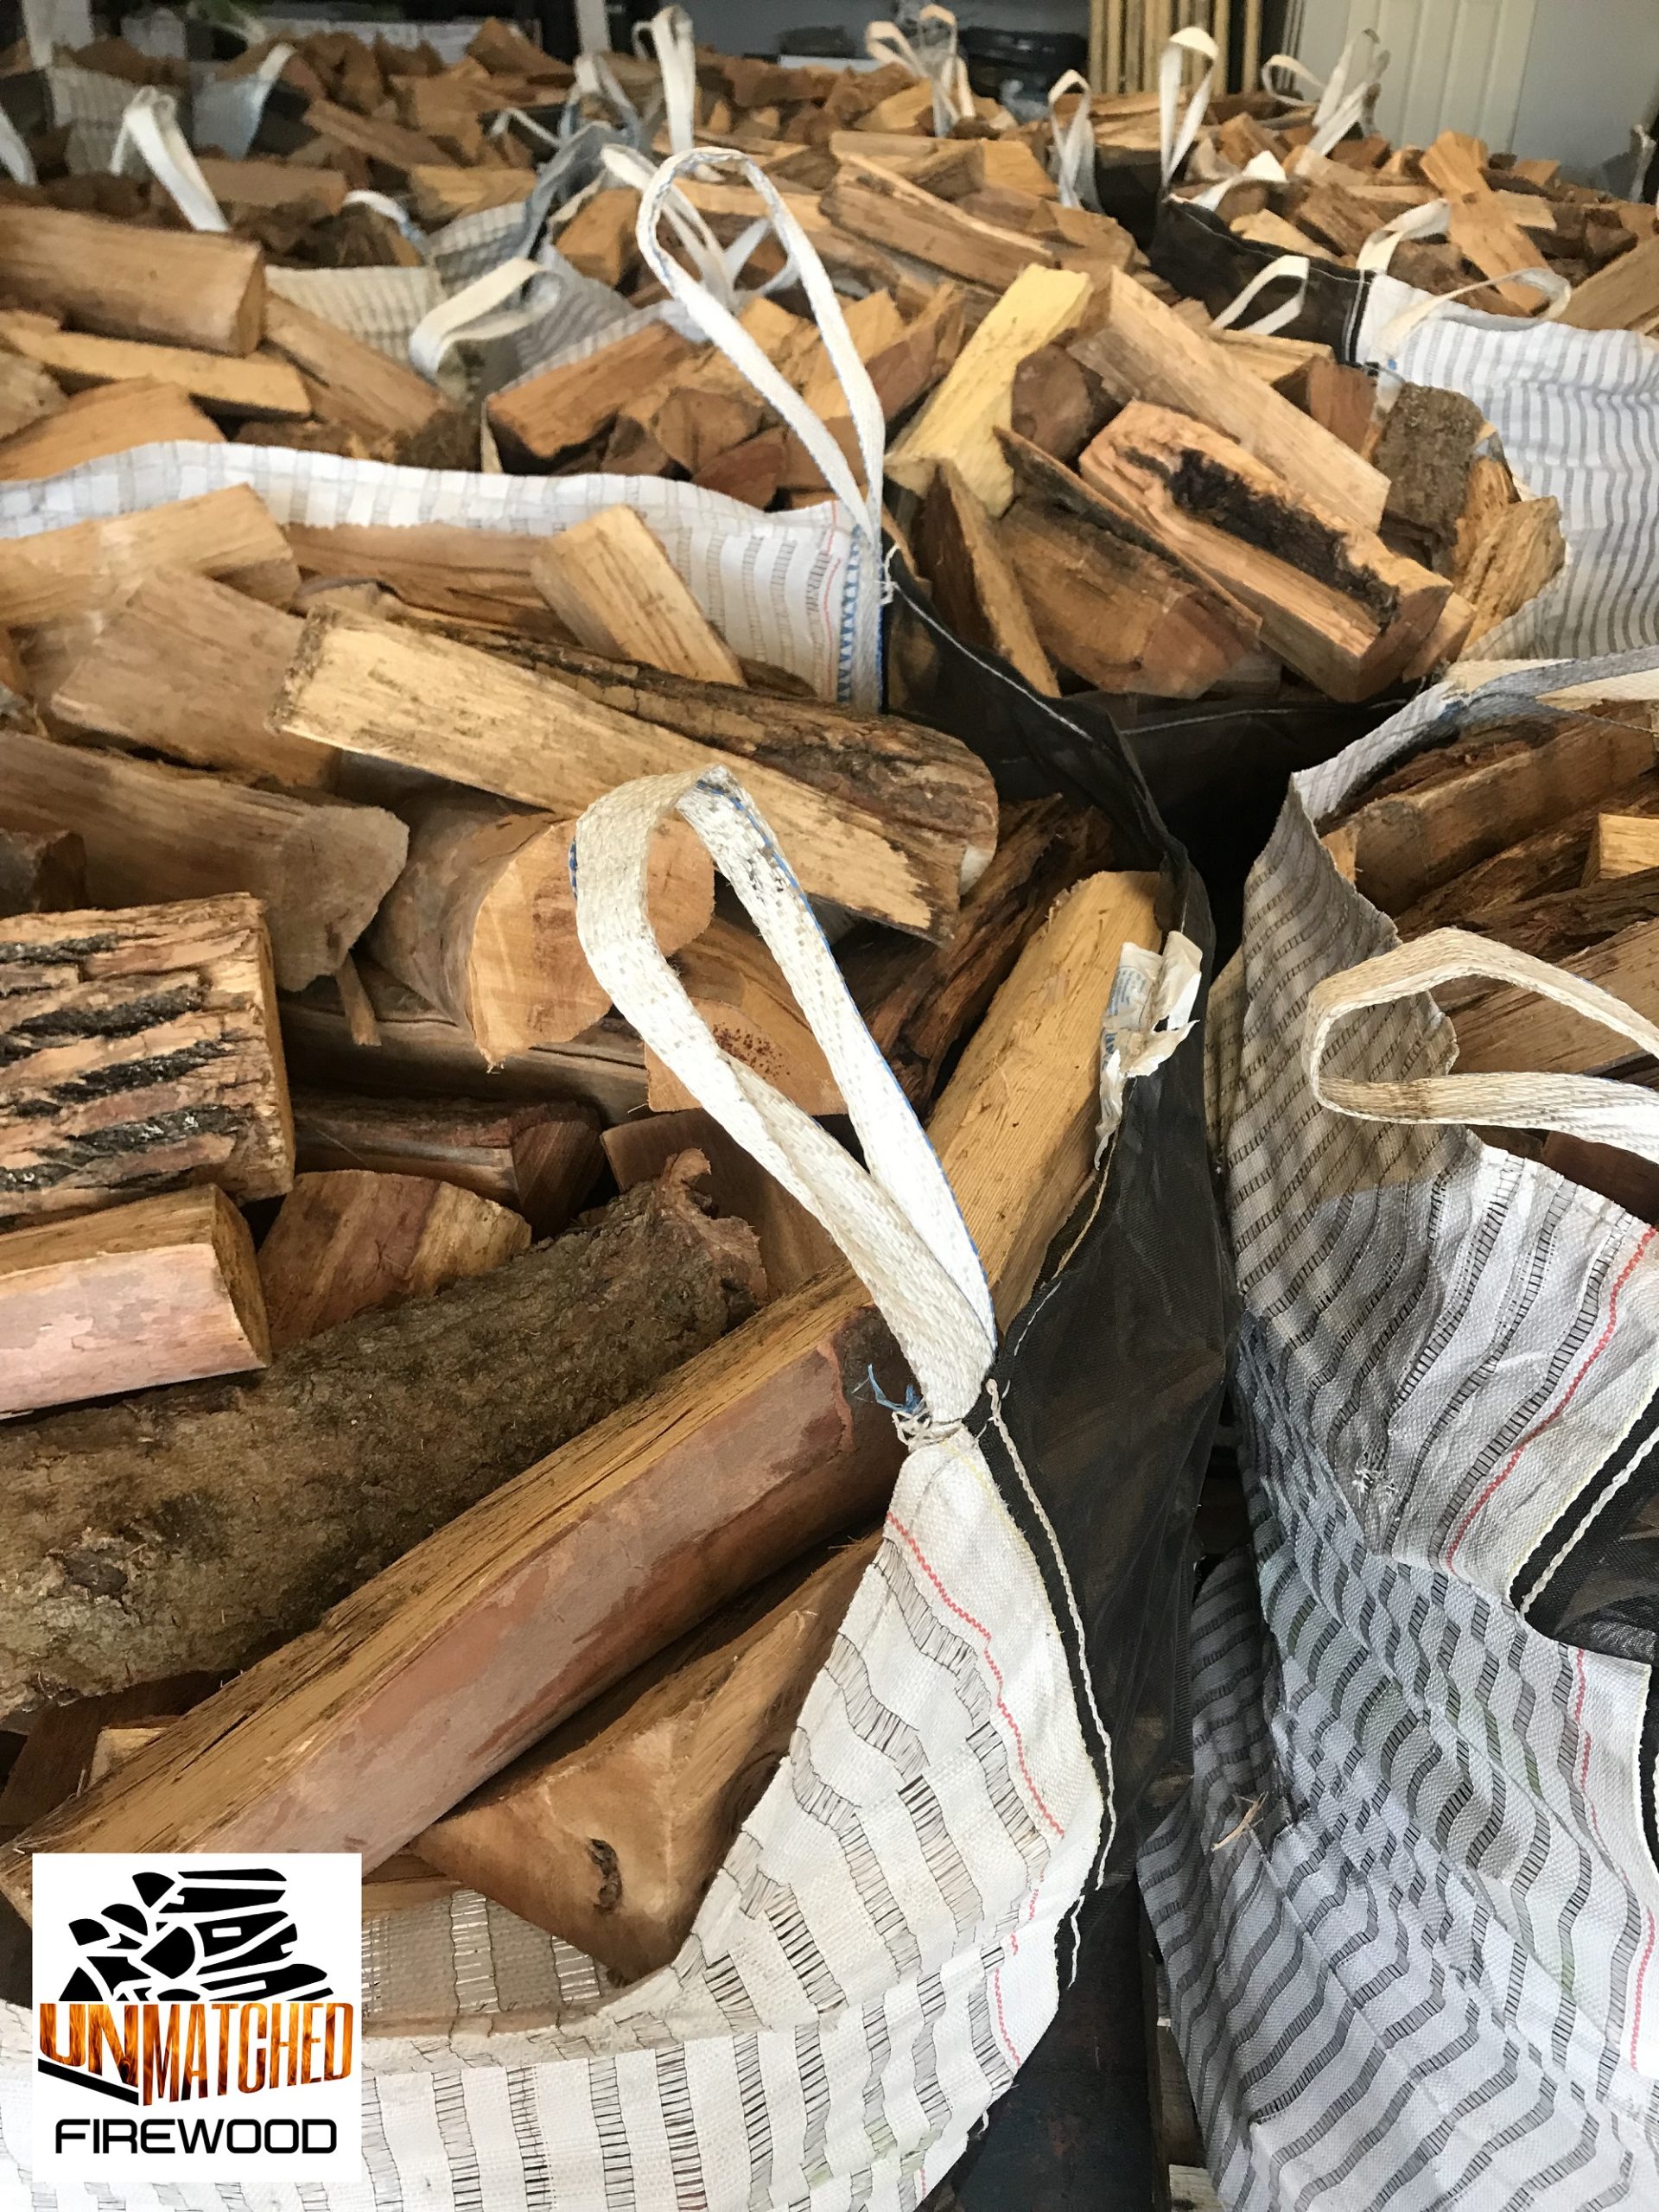 Our Kiln Dried Firewood in the Warehouse